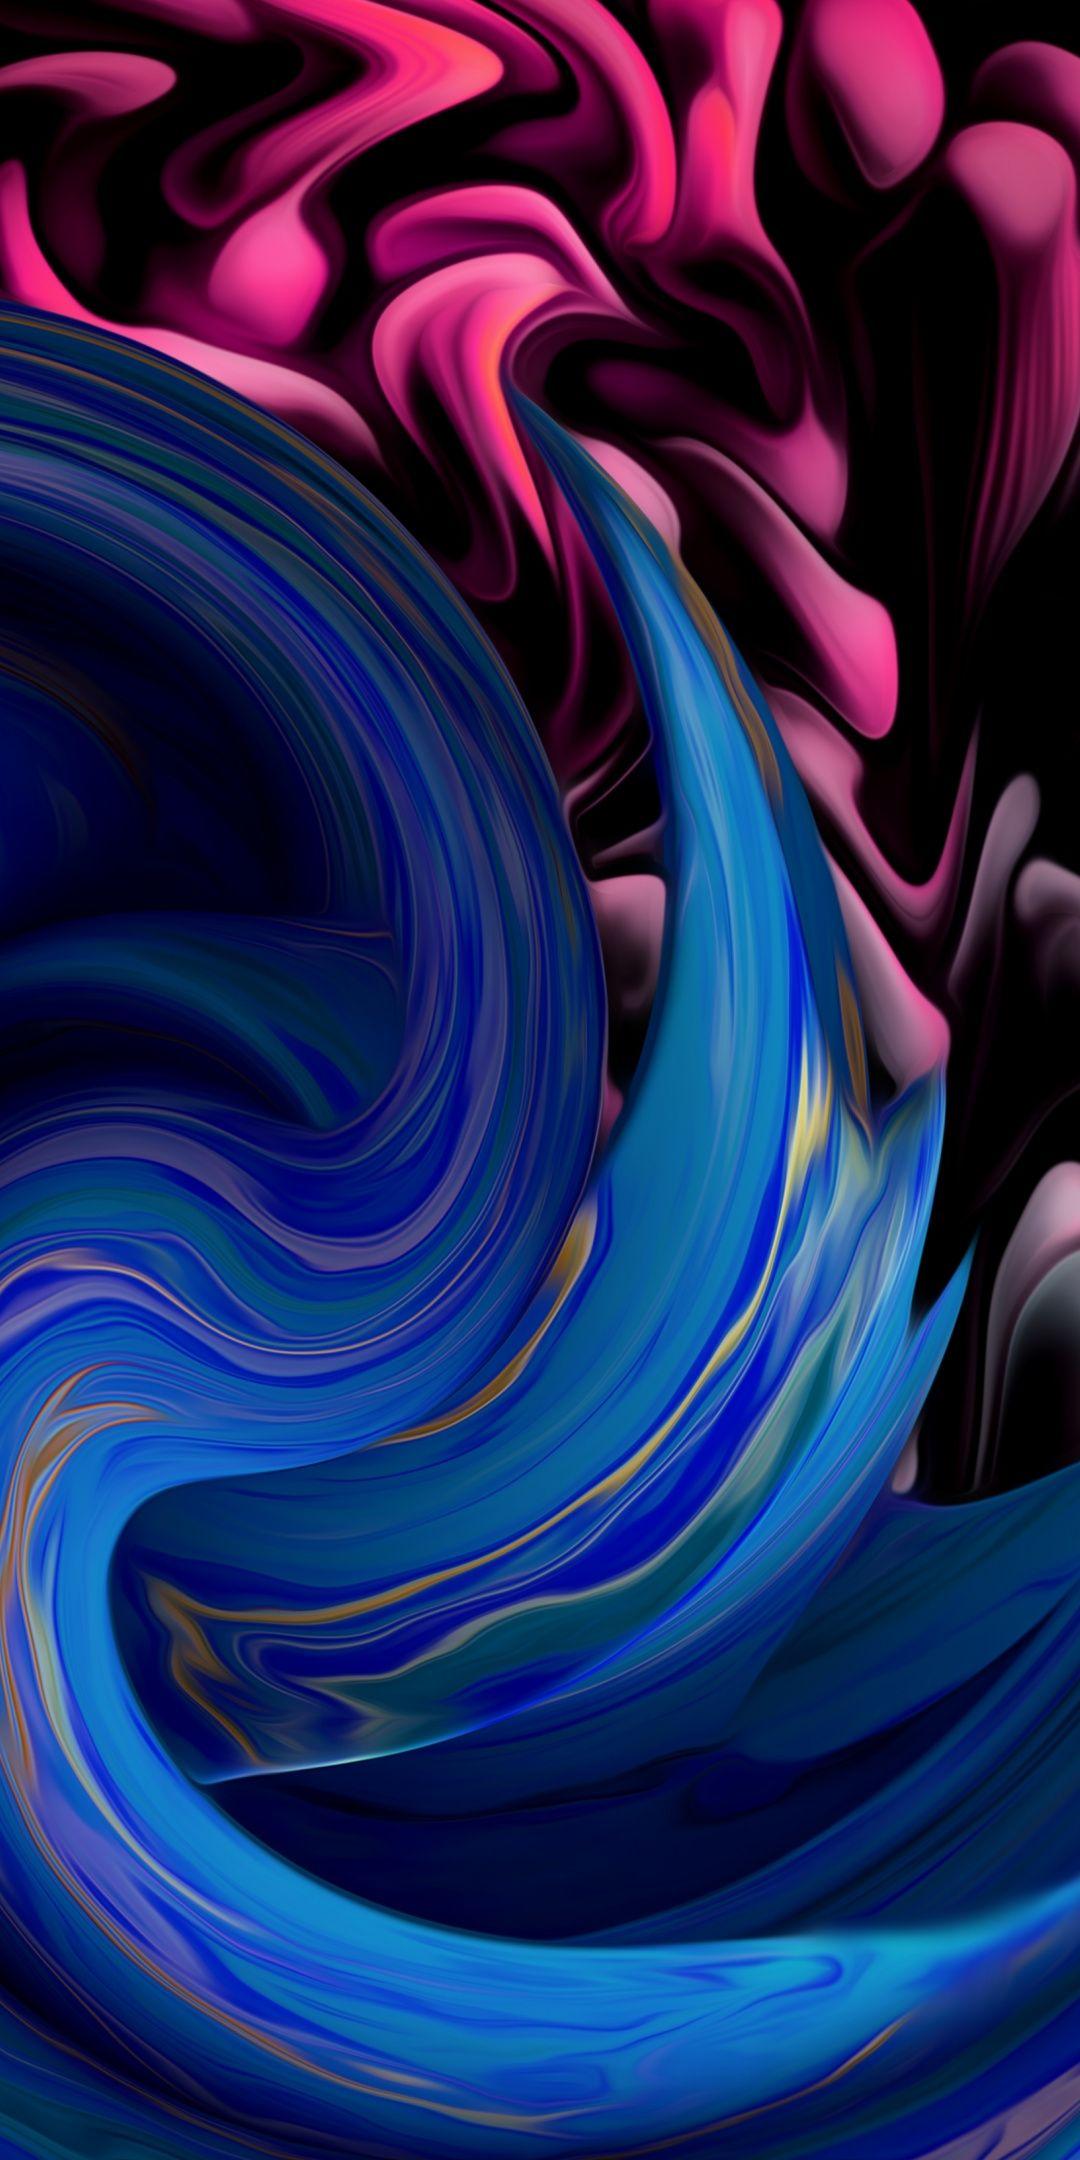 Curves, Fluid, Blue Pink, Abstract, 1080x2160 Wallpaper. Abstract